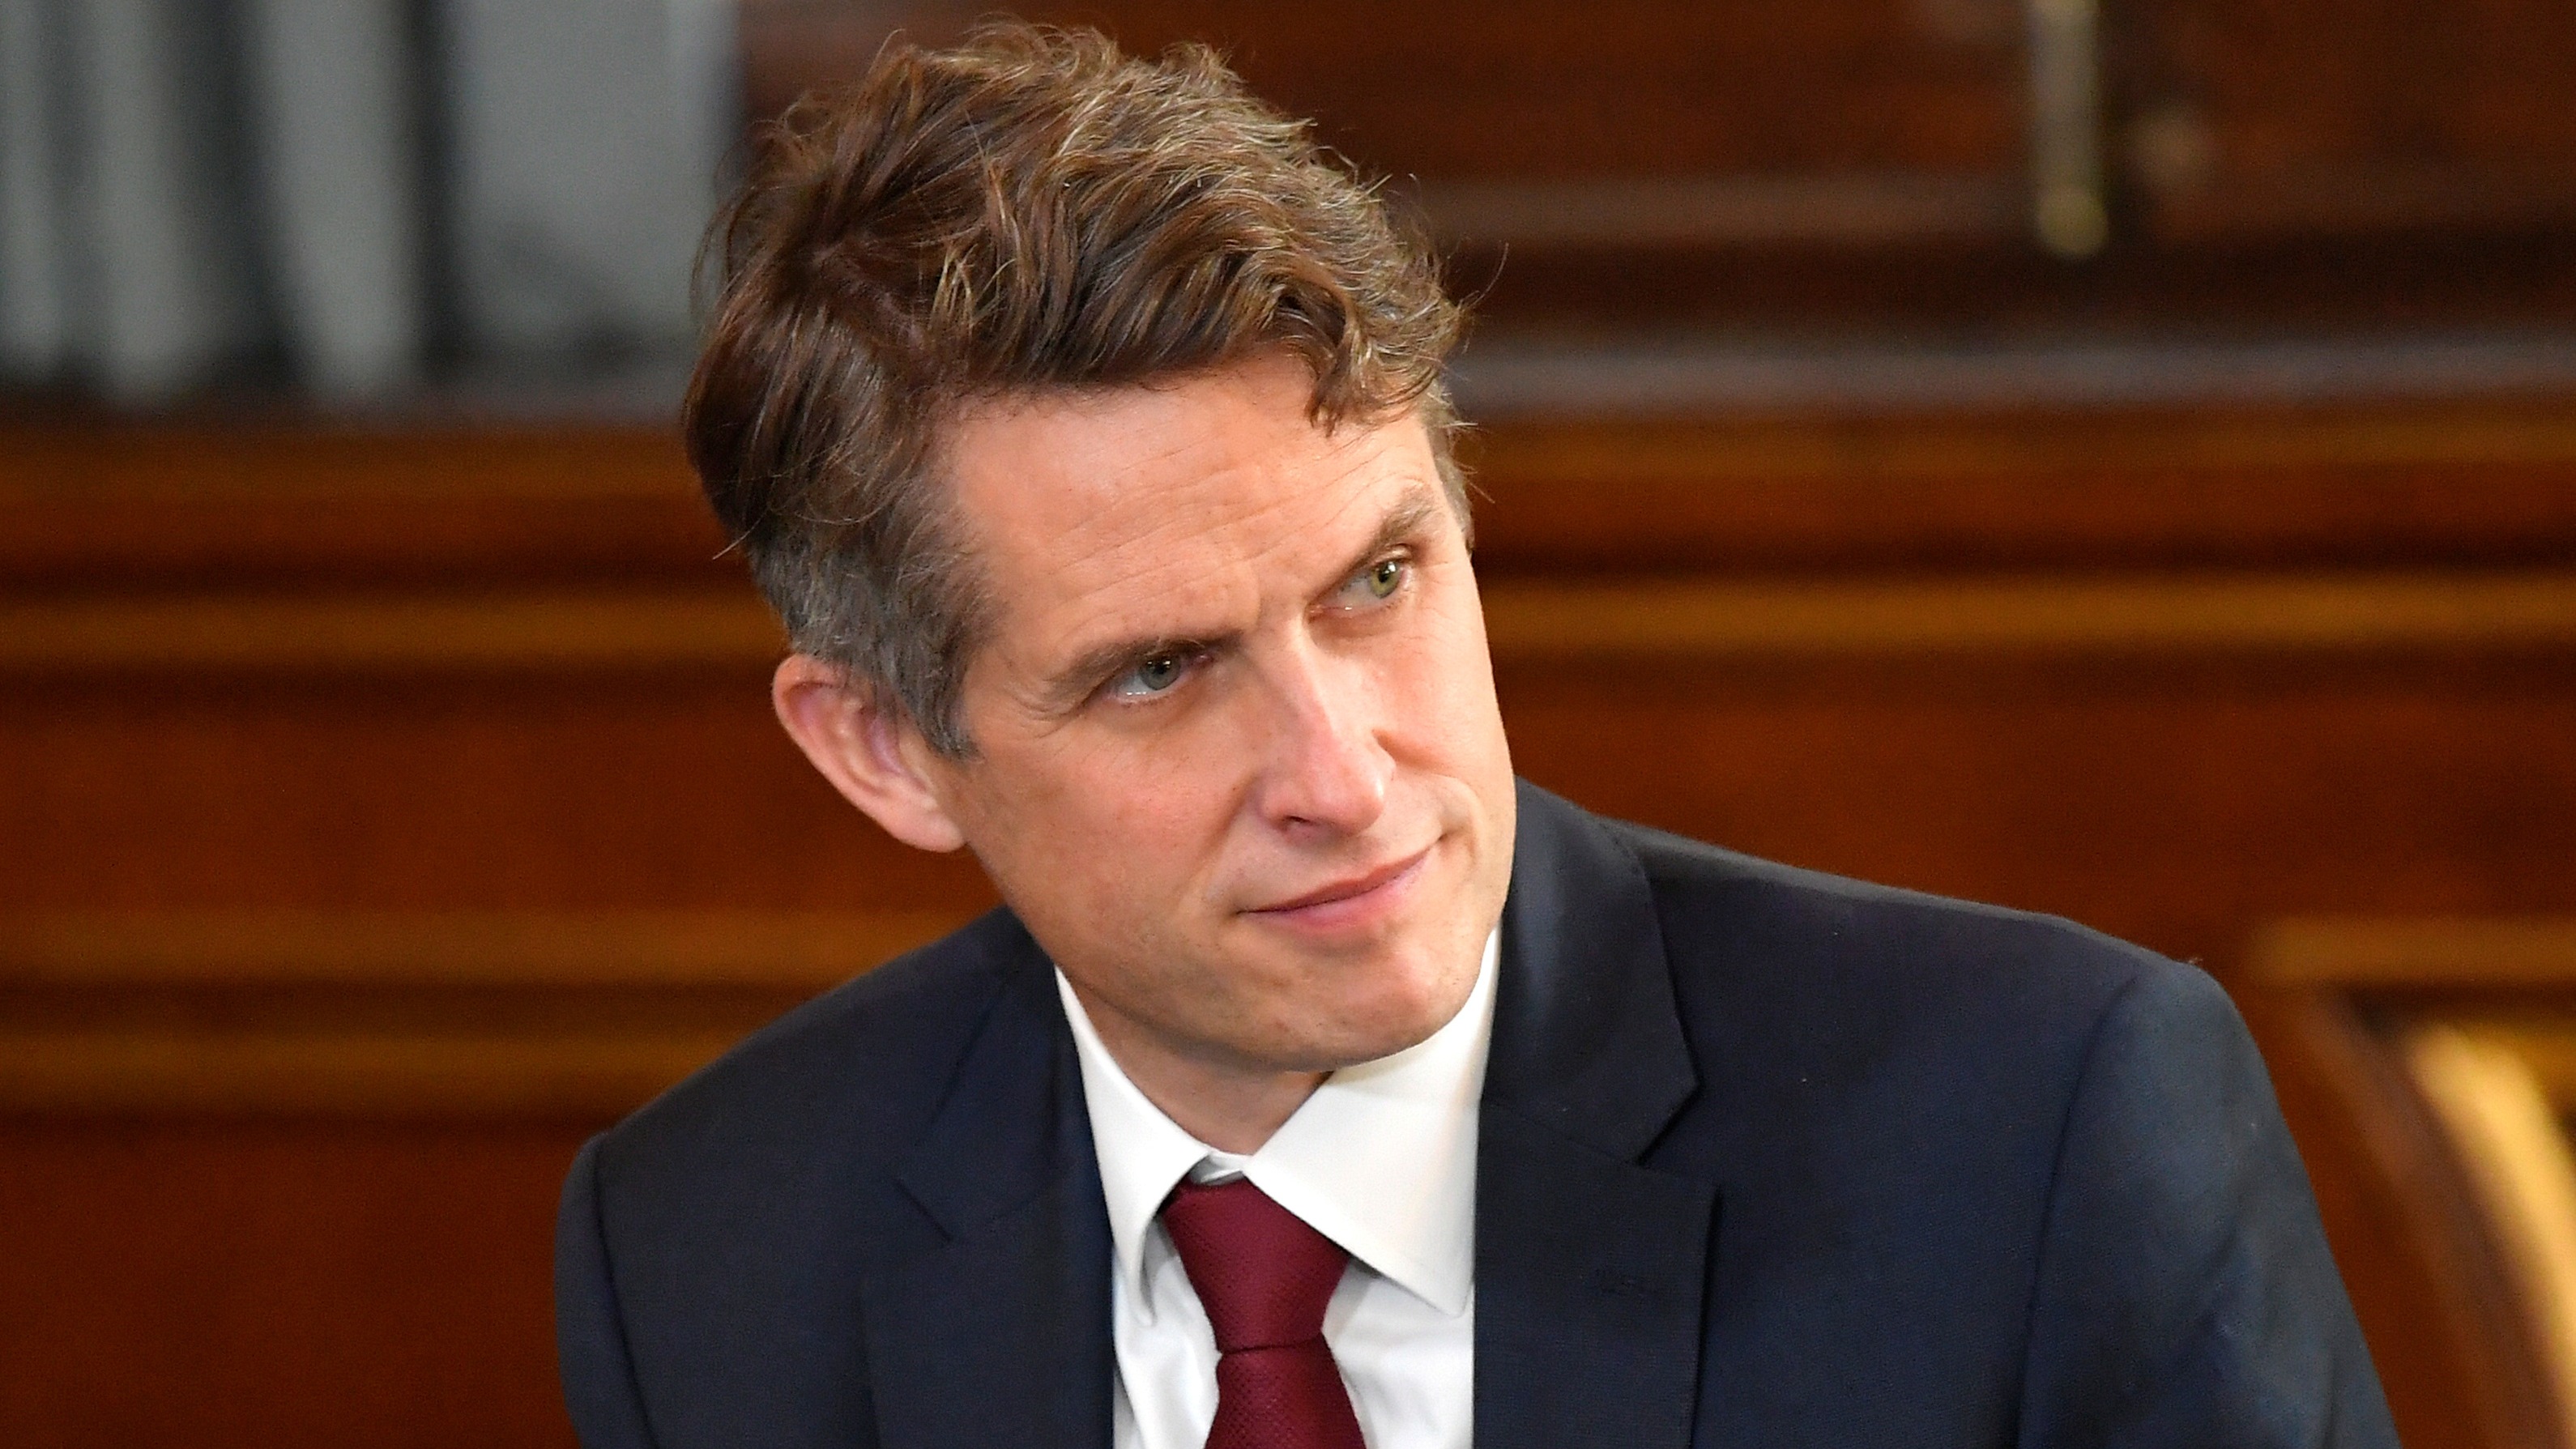 fresh-conduct-allegations-around-gavin-williamson-serious-says